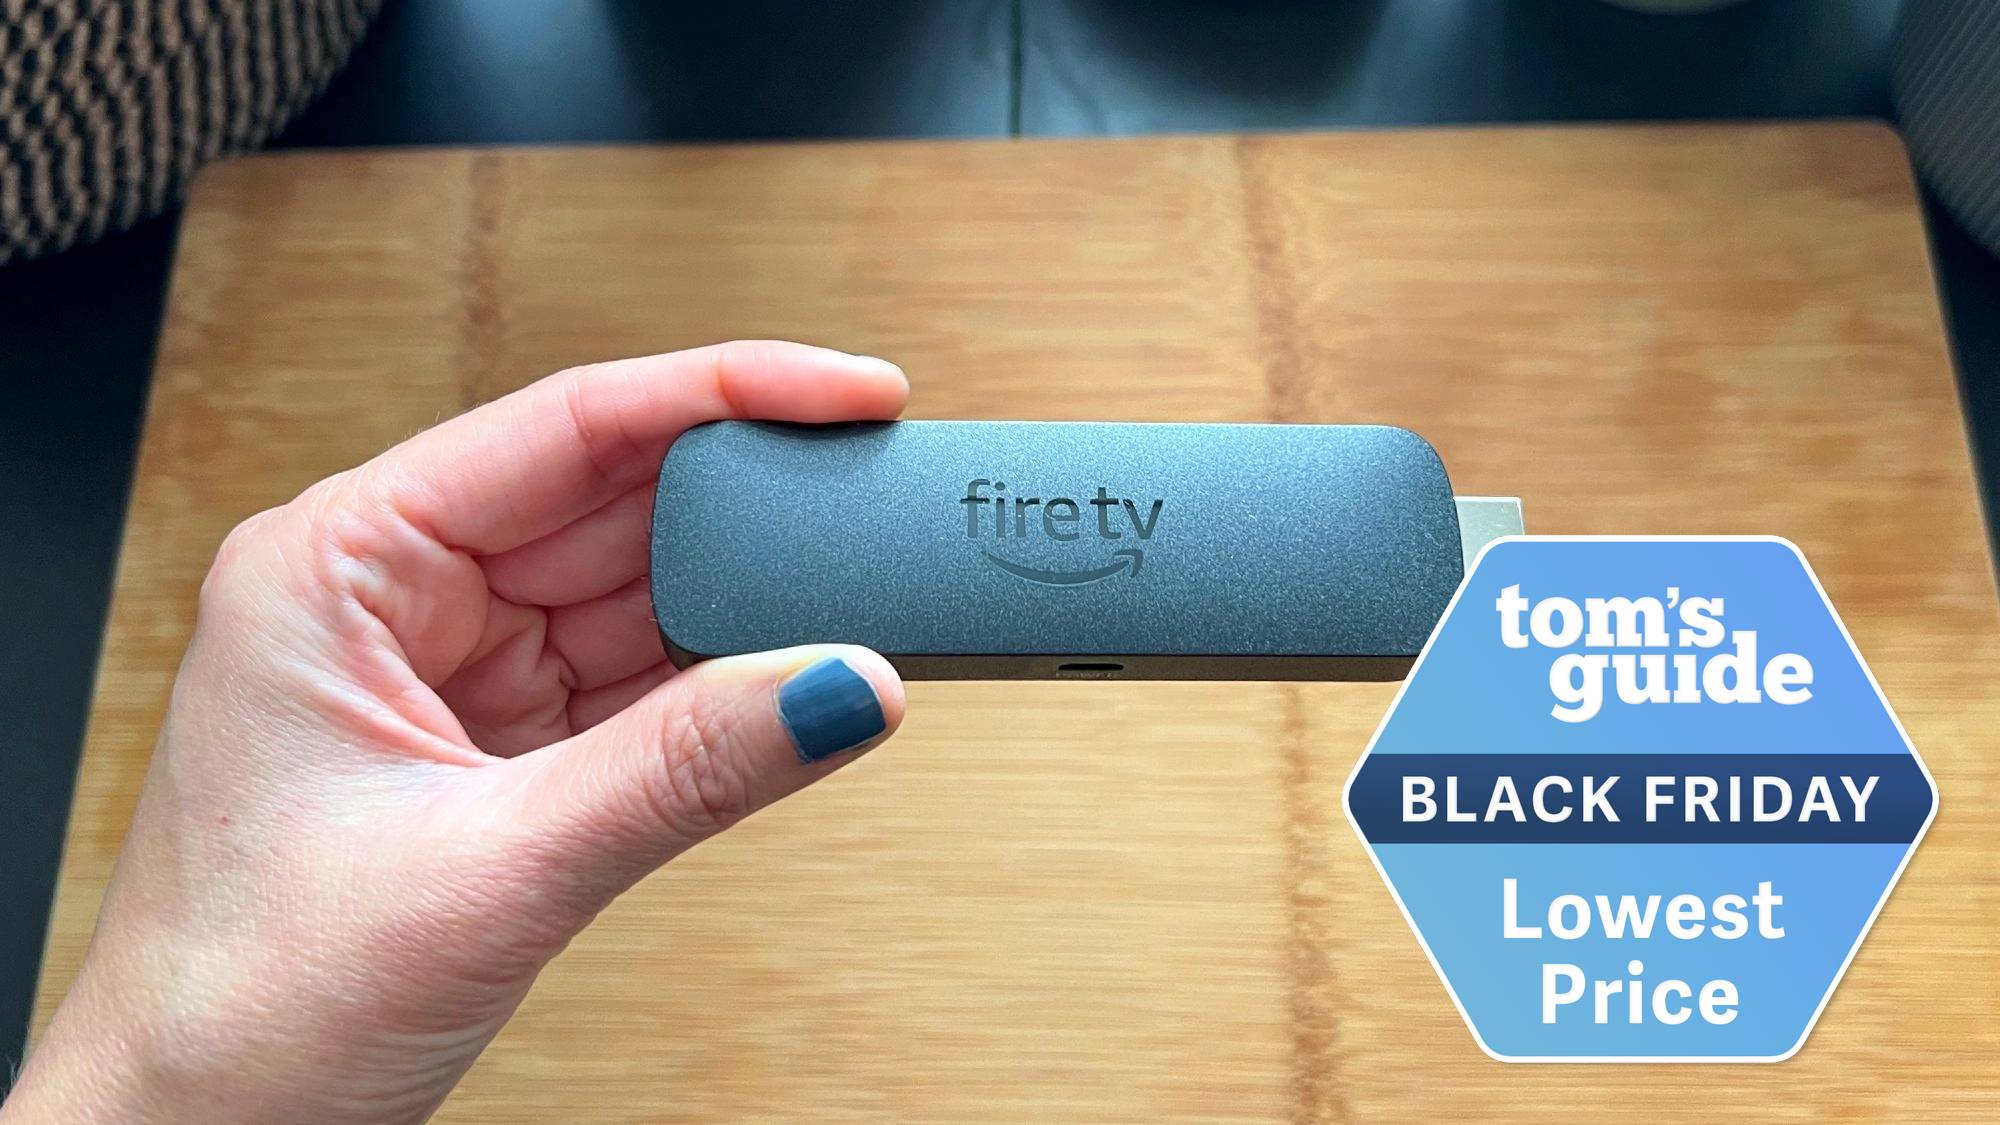 Fire TV Sticks are already up to 50% off before Black Friday -  Dexerto